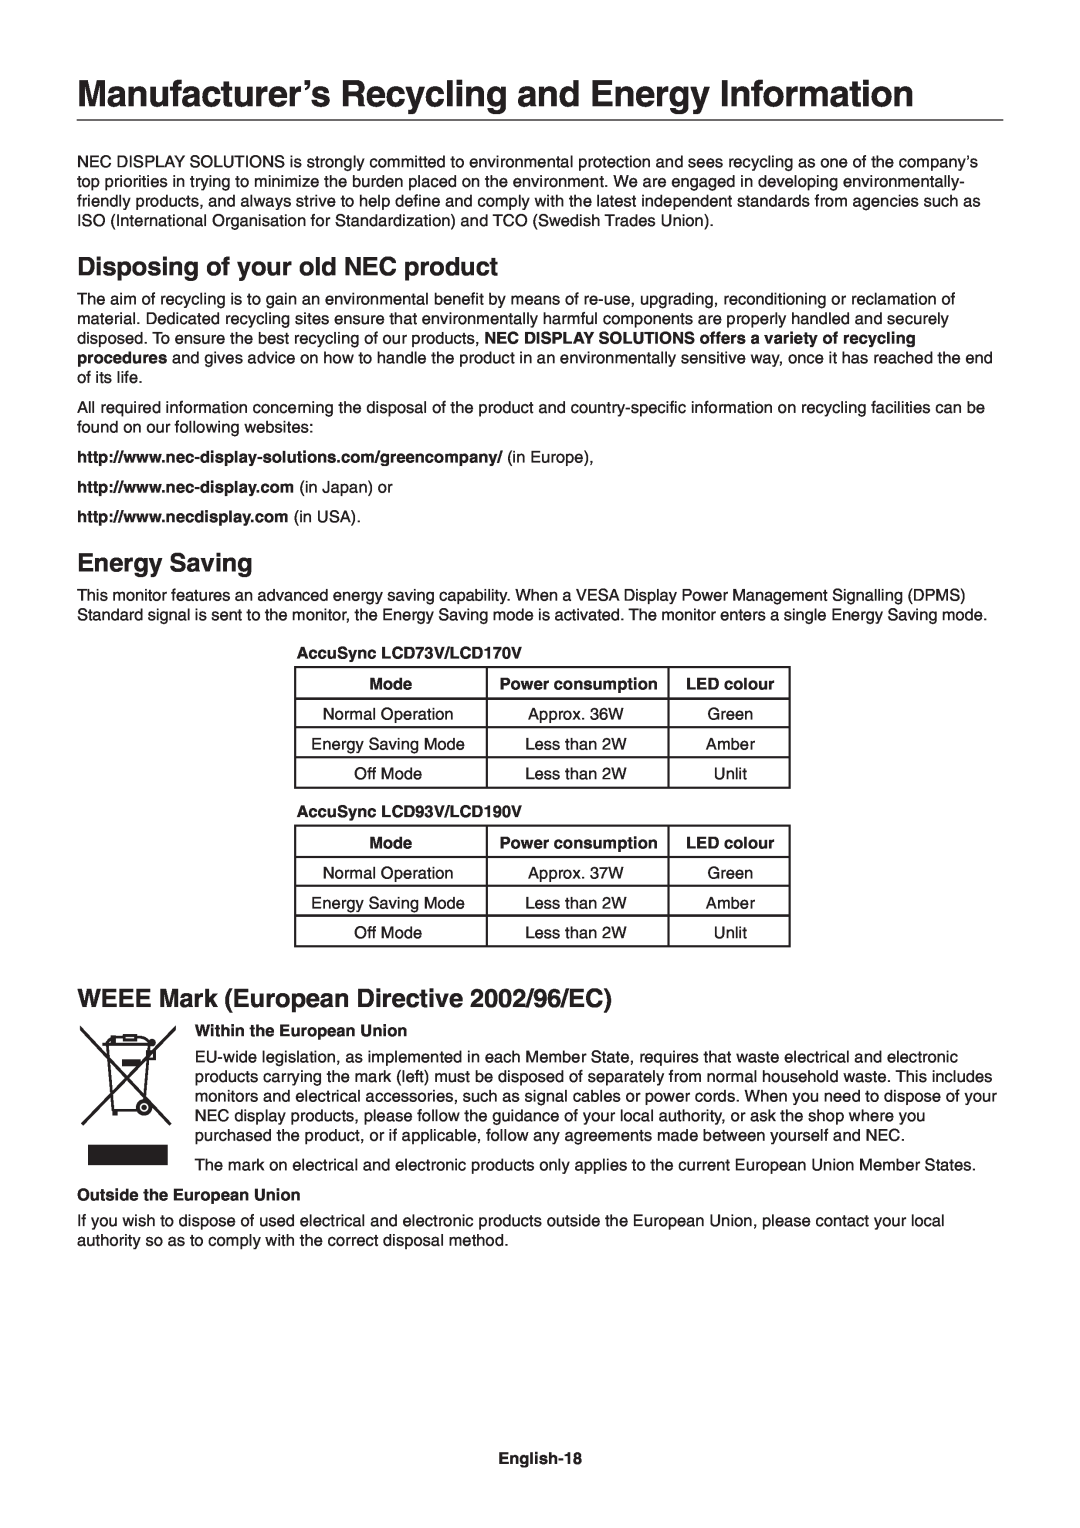 NEC LCD170V ManufacturerÕs Recycling and Energy Information, Disposing of your old NEC product, Energy Saving, Mode 